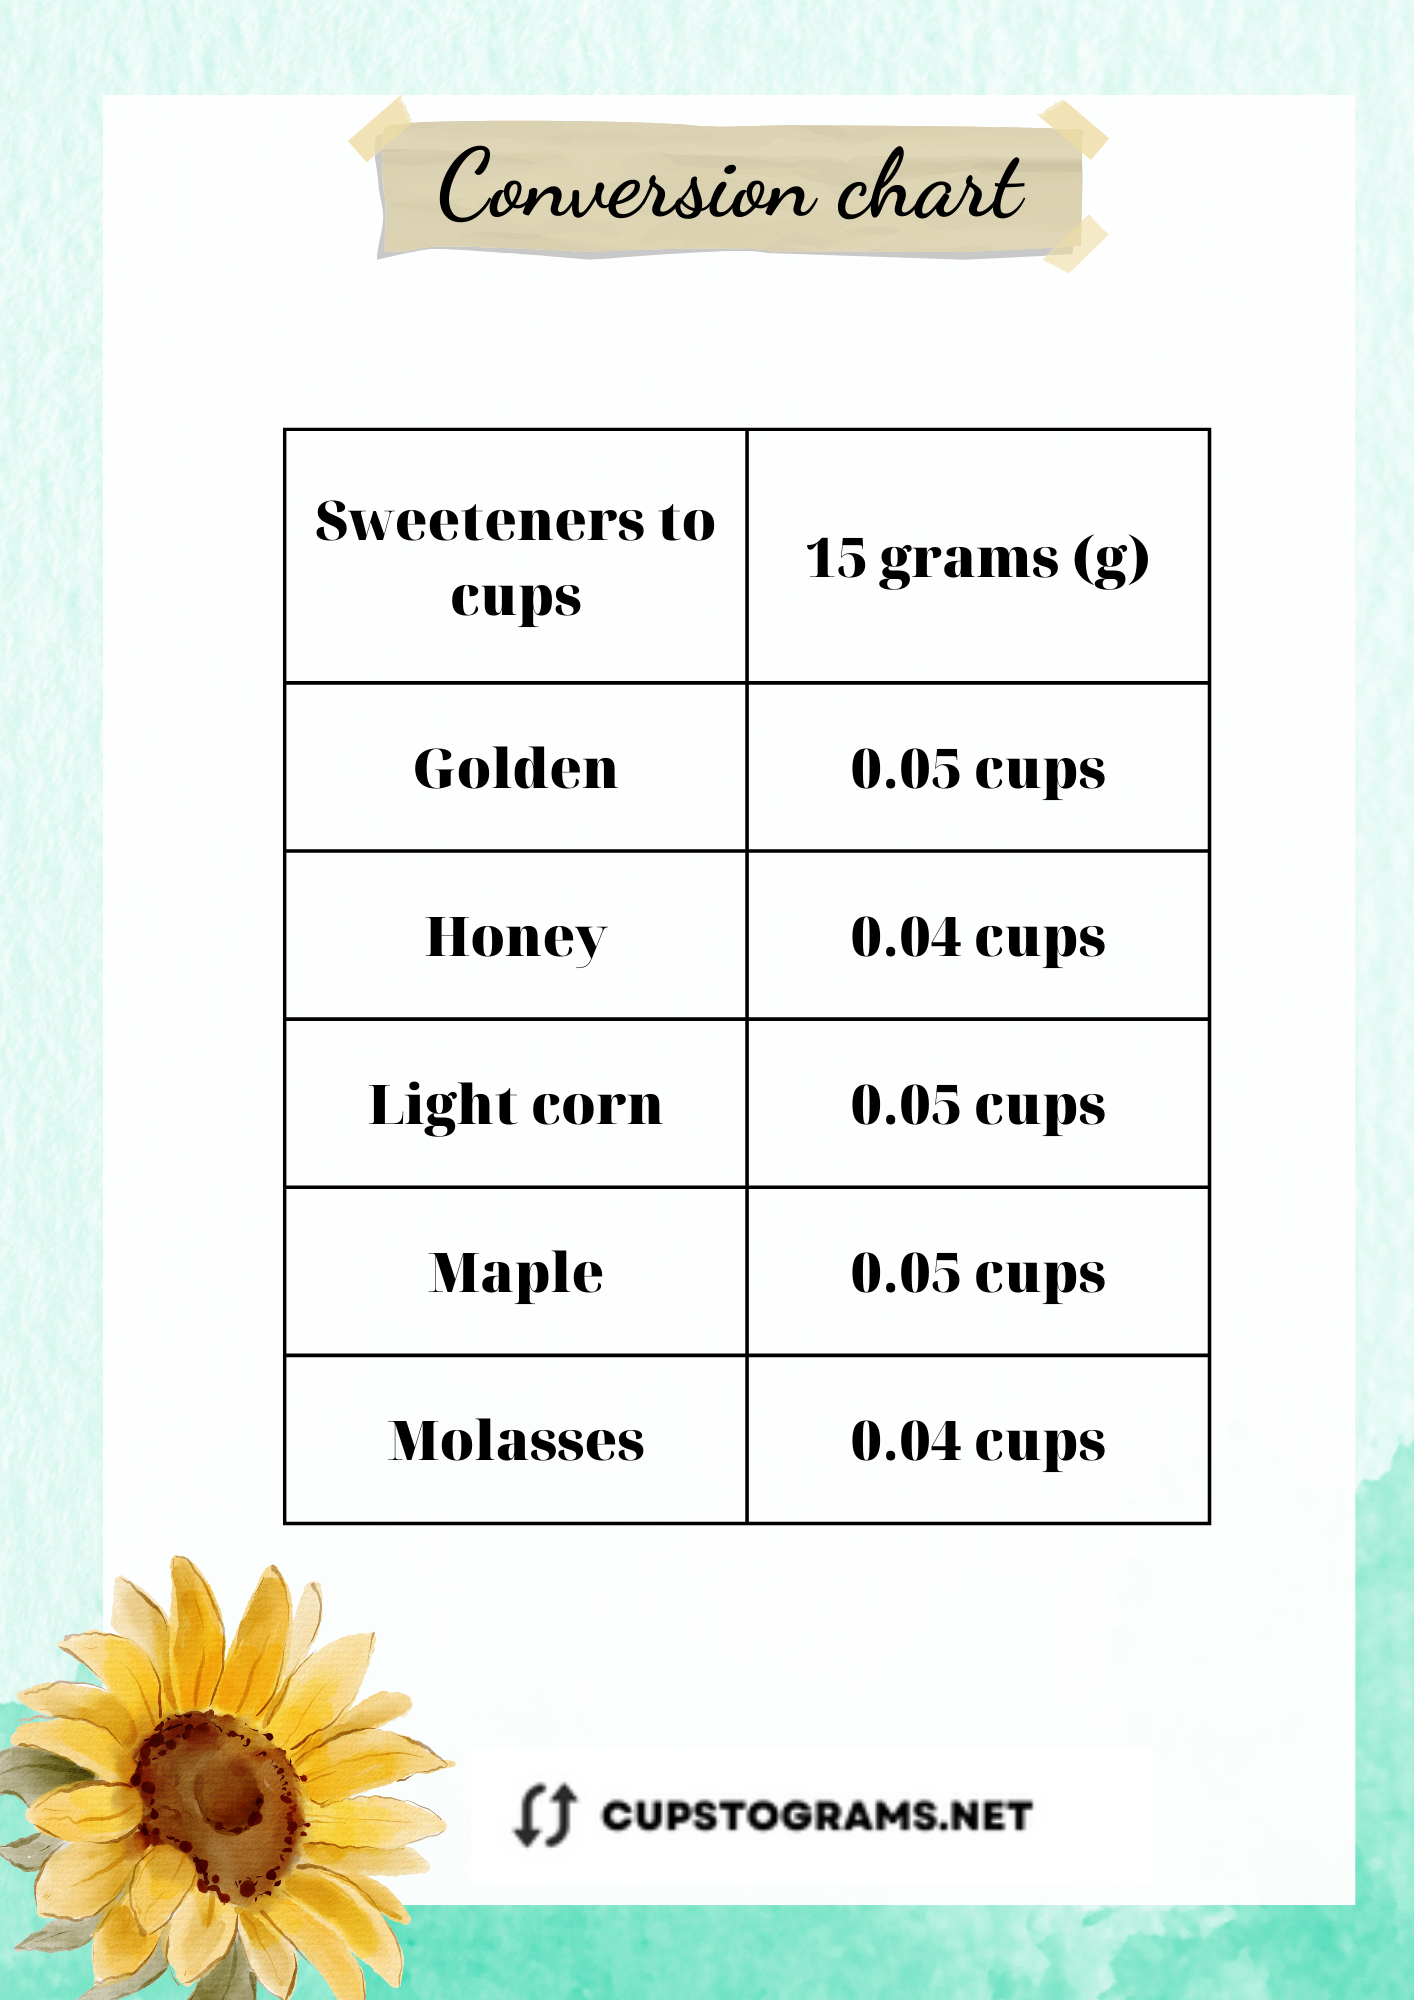 Table of conversions for 15 grams of sweeteners to cups